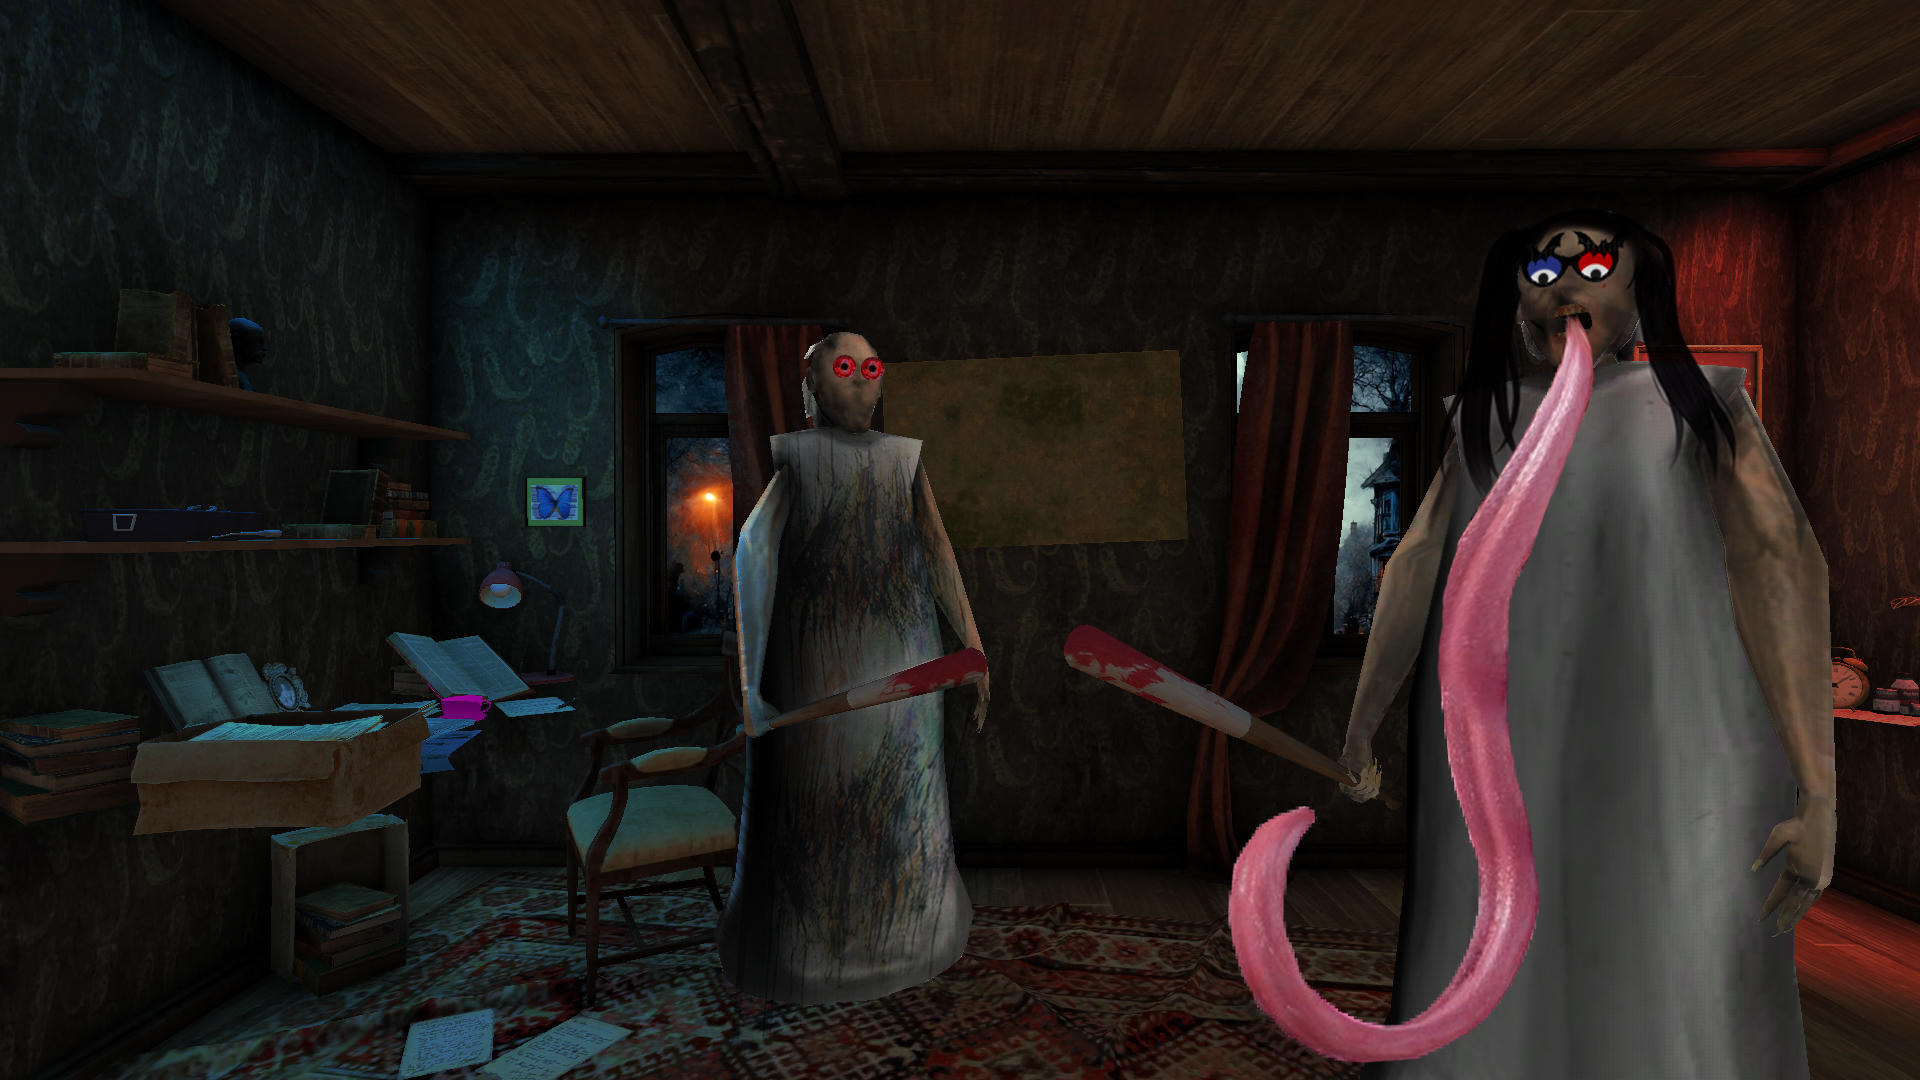 Screenshot 1 of Scary Granny Gruseliges Grany-Spiel 1.2